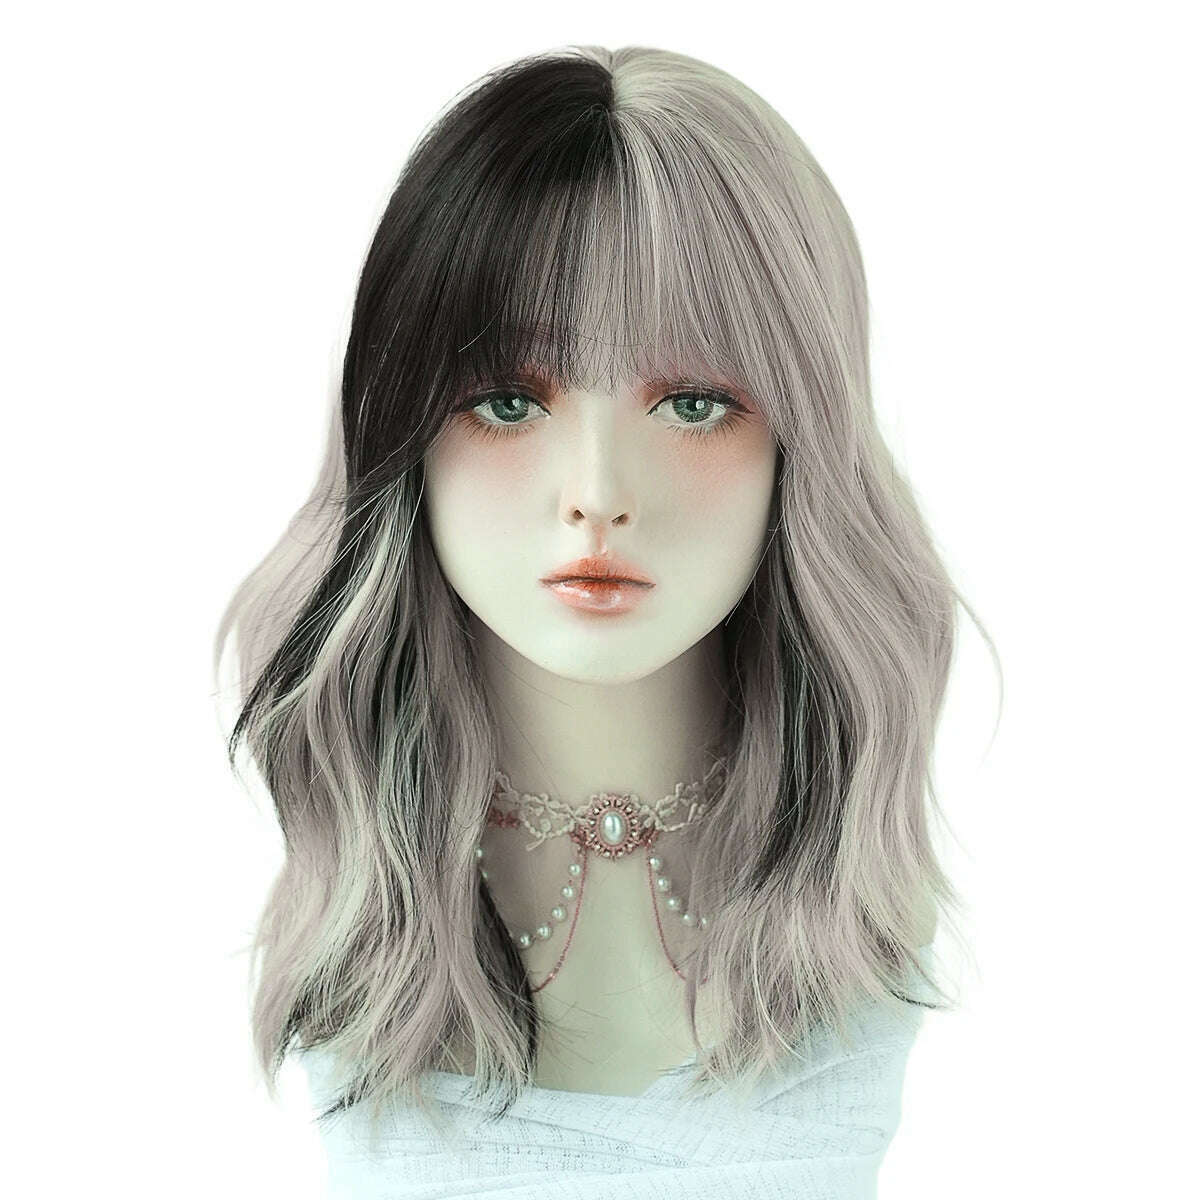 KIMLUD, NAMM Silver black Wavy Wig for Woman Daily Party Cosplay Middle Part Natural Synthetic Hair Wig Heat Resistant Fiber, KIMLUD Womens Clothes